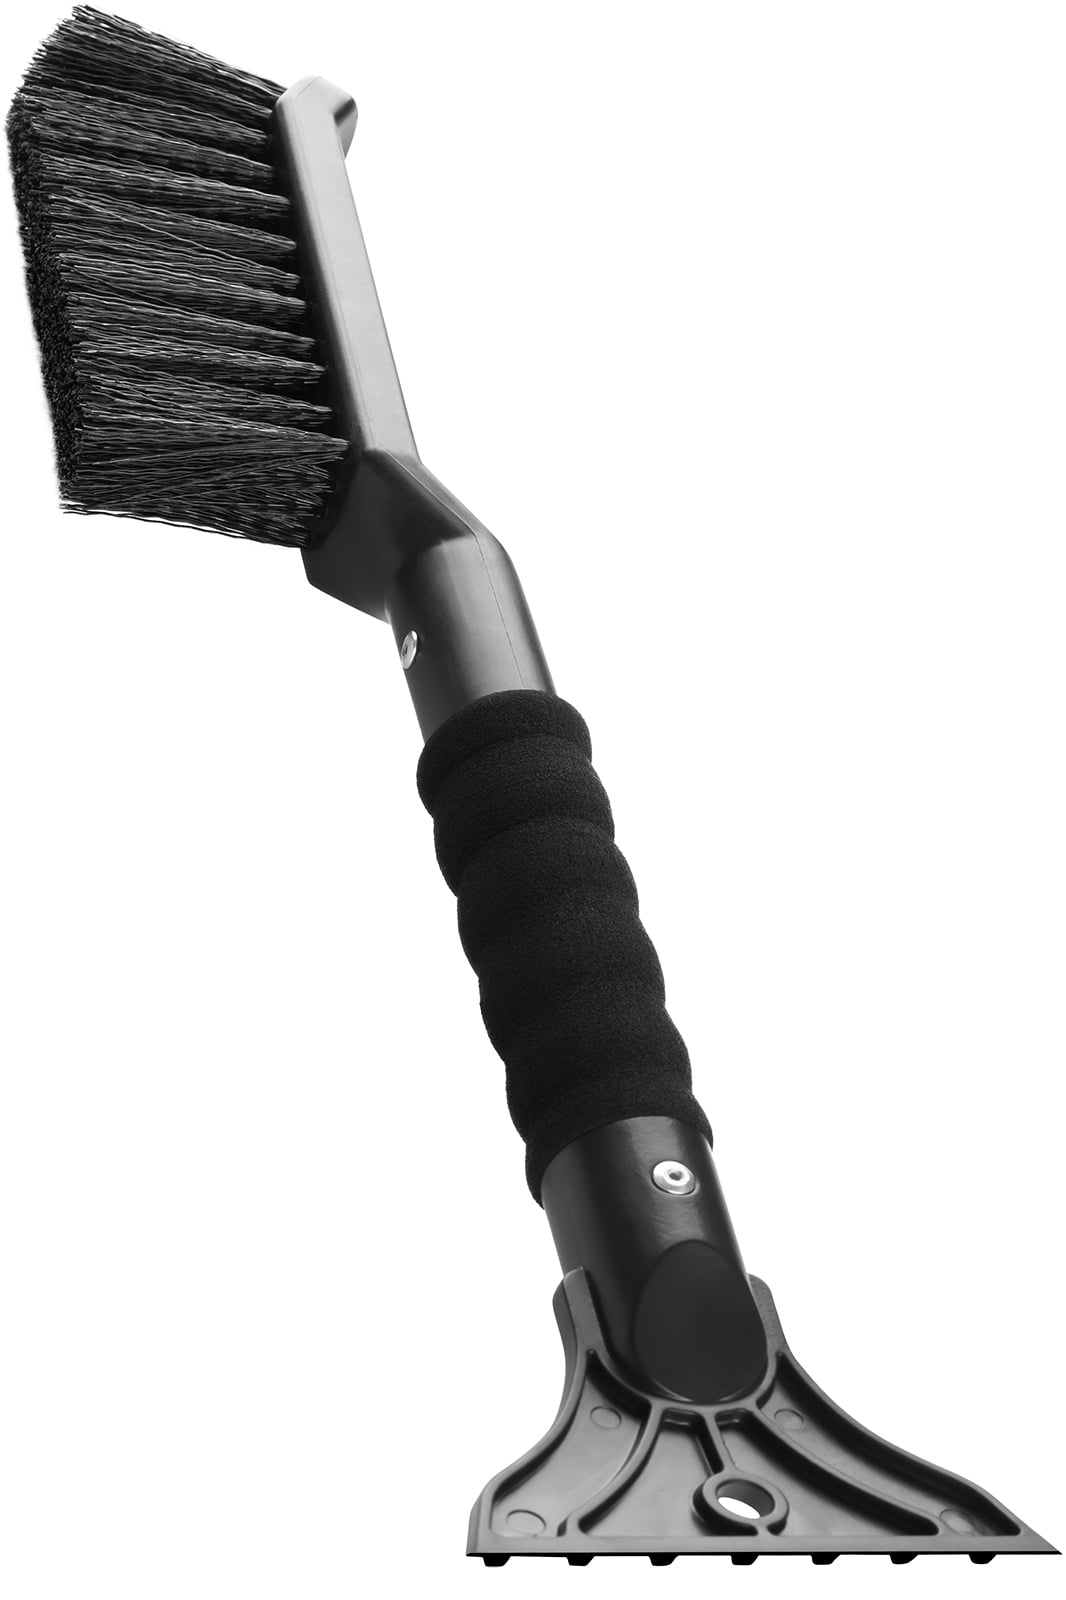 Ice Scrapers with Metal Grip Snowbrush for Car Windshield Snowy Day Winter Retractable Snow Removal Brushes 24, Black+White Huryfox Snow Brush and Ice Scraper 